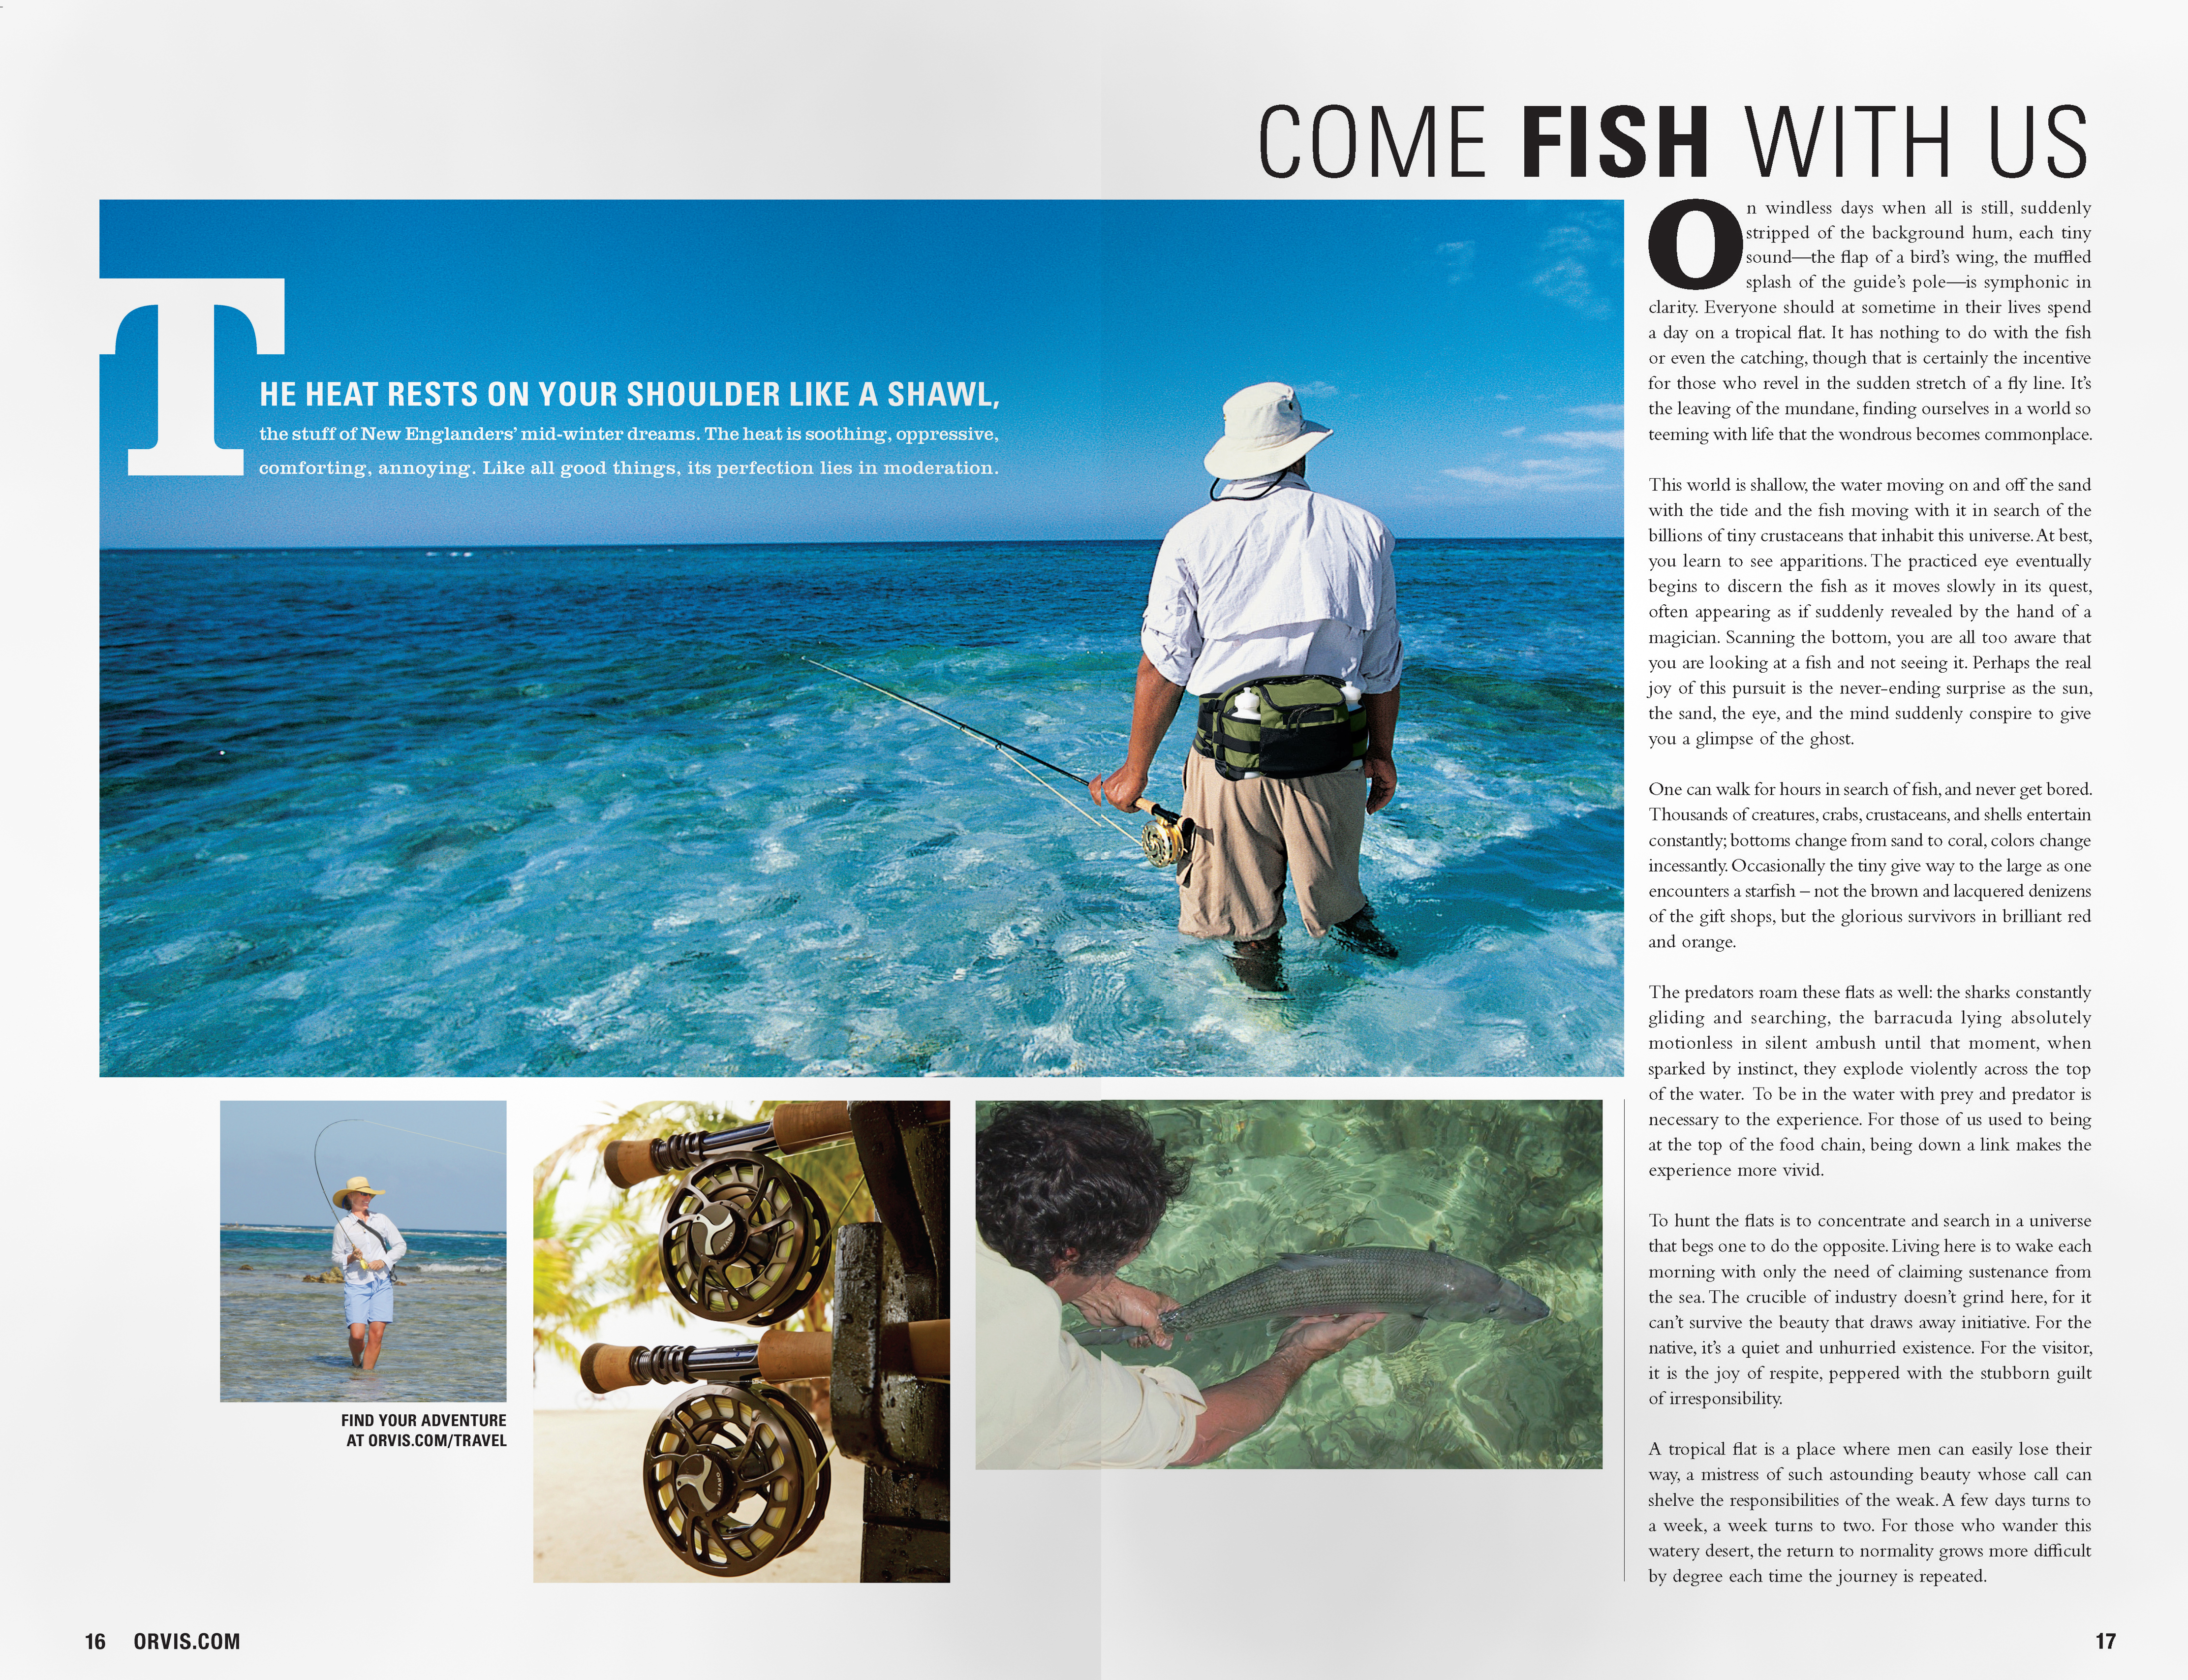 16-17_Belize_ComeFish_Page_1